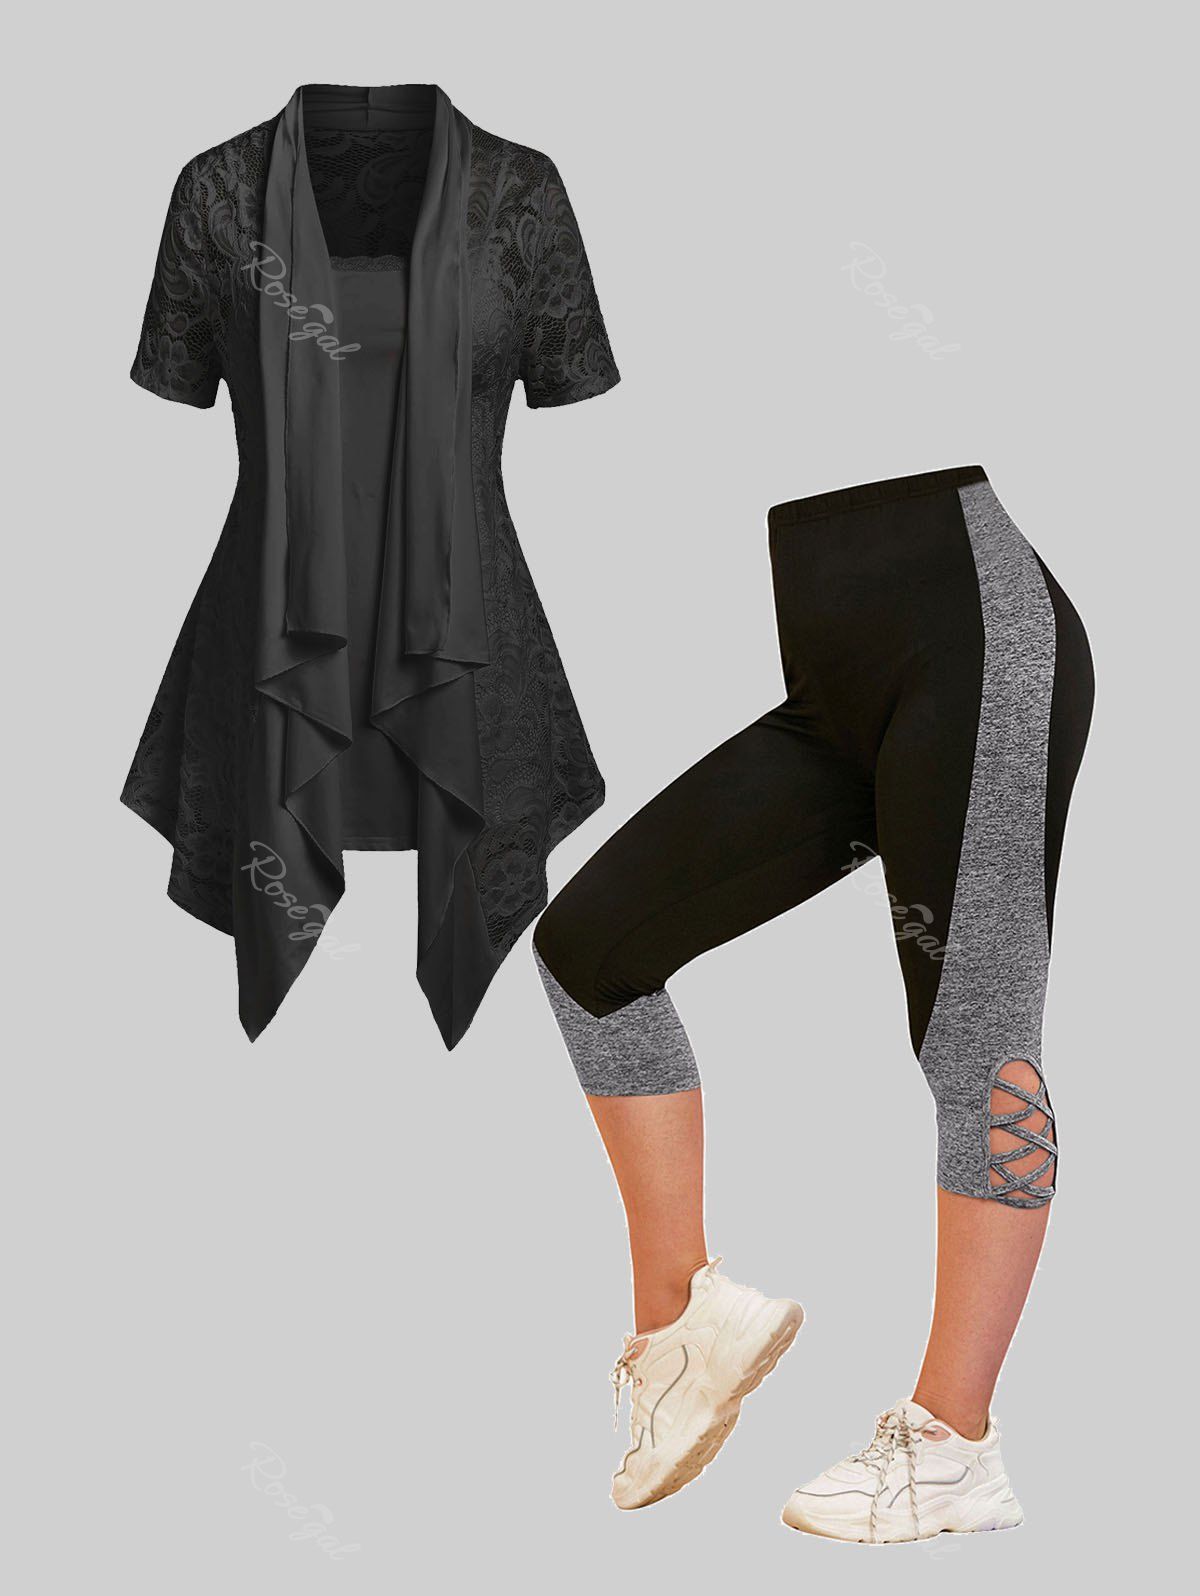 Hot Asymmetric Lace Draped Cardigan Set and Leggings Plus Size Summer Outfit  